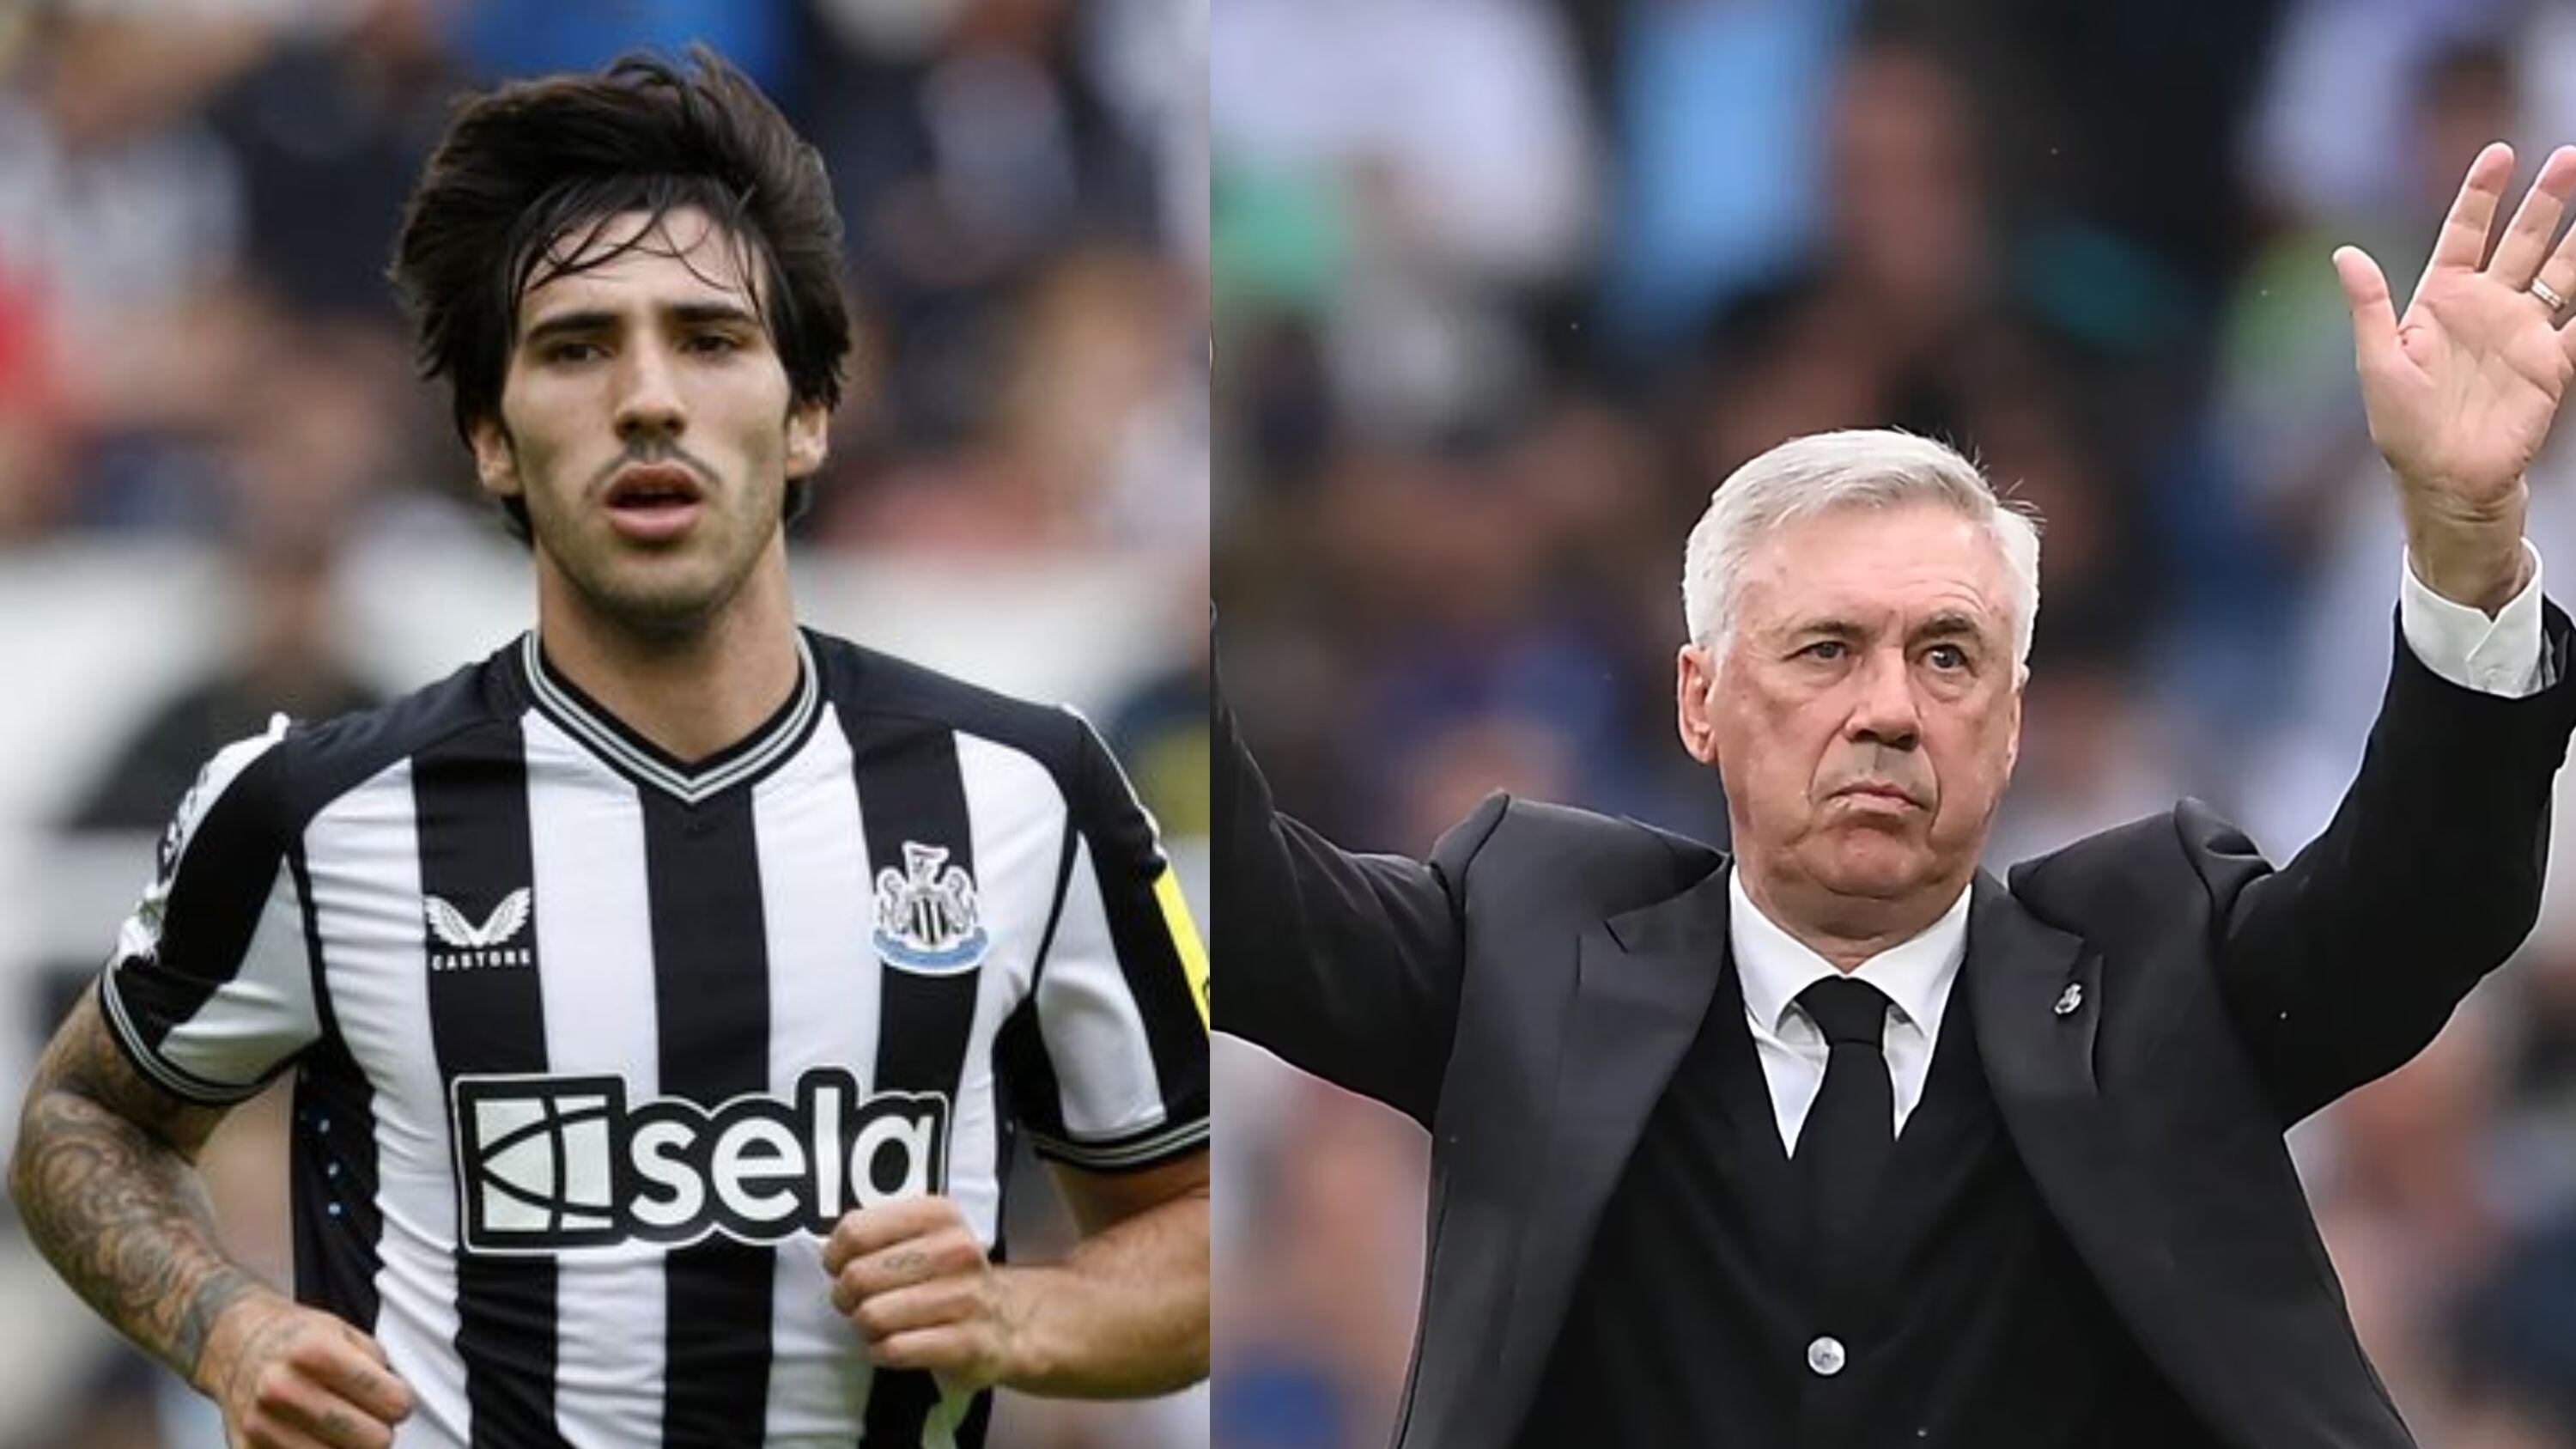 After the Sandro Tonali scandal, the Real Madrid player that Newcastle is looking to sign